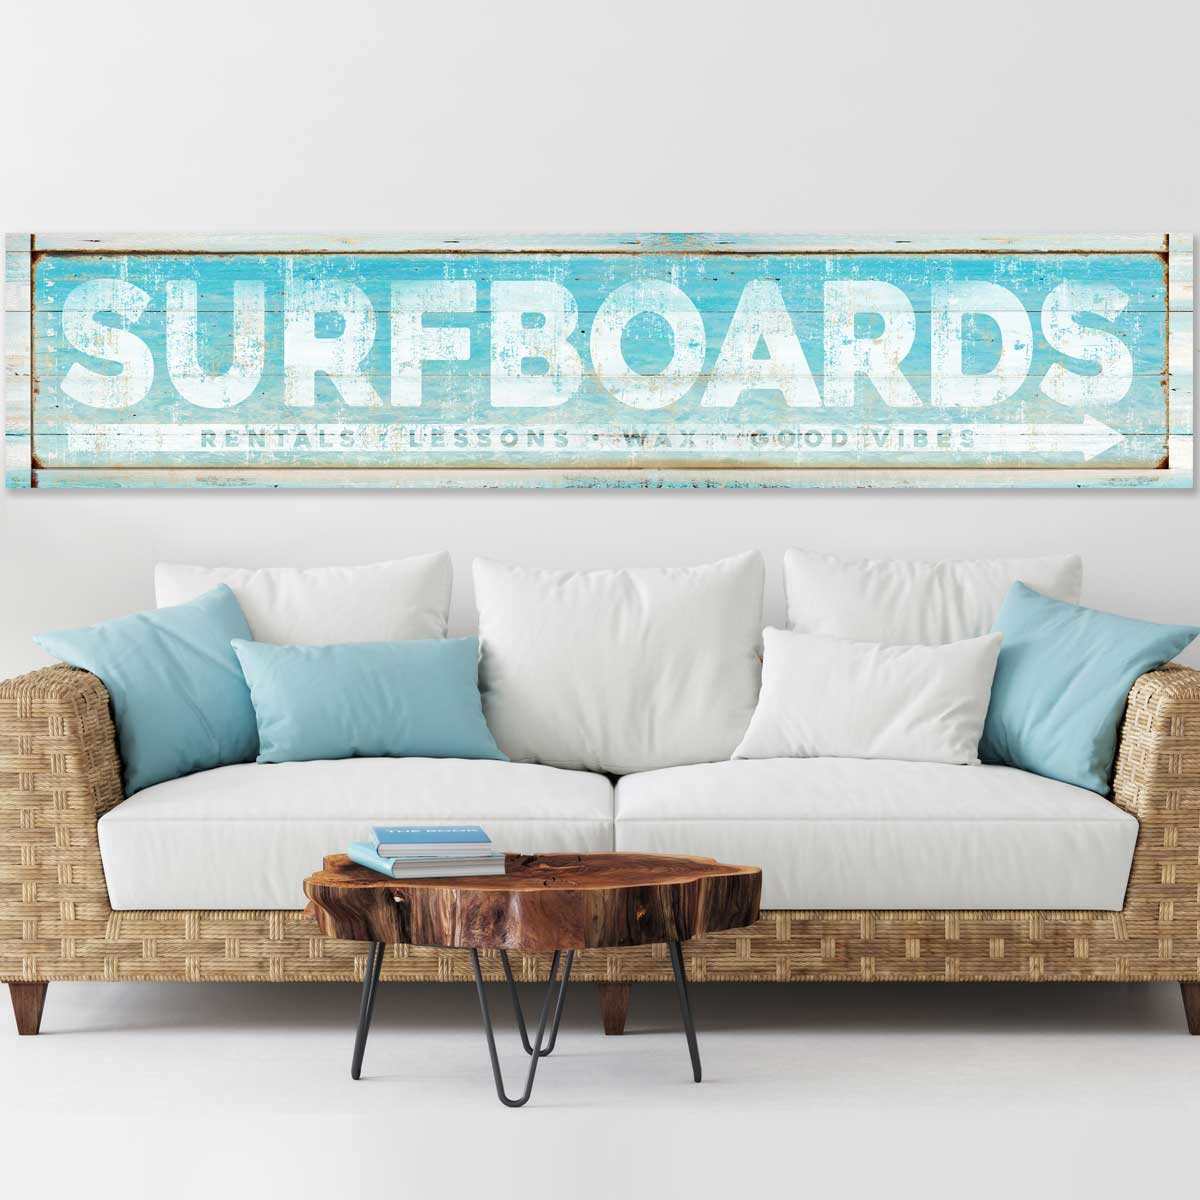 Coastal Decor - Surf Decor that is on teal wood with the words Surfboards, rental, lessons, wax. Beach house Sign